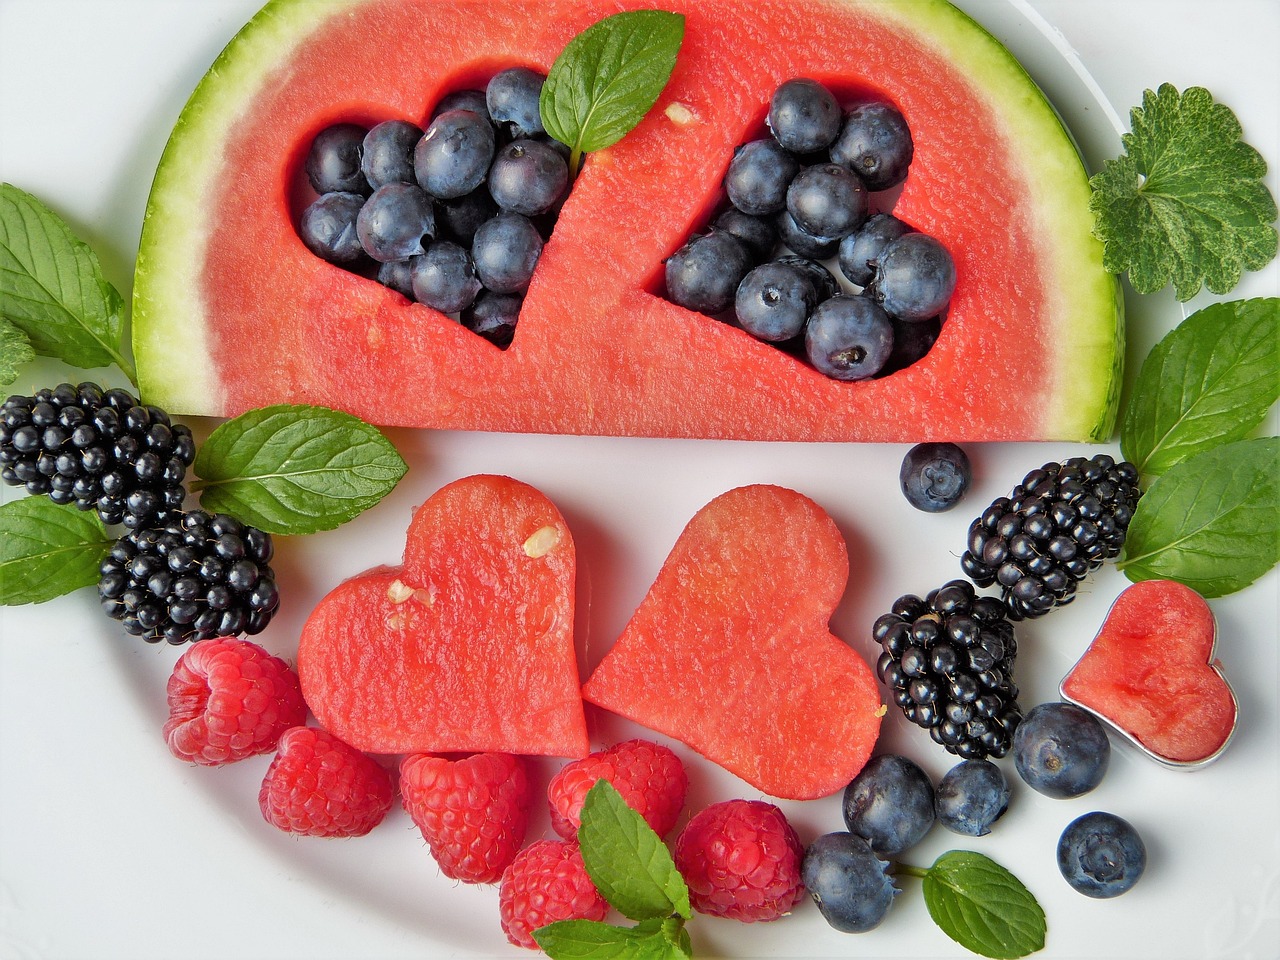 A variety of fresh fruit arranged on a plate. Some cut in the shape of a heart.